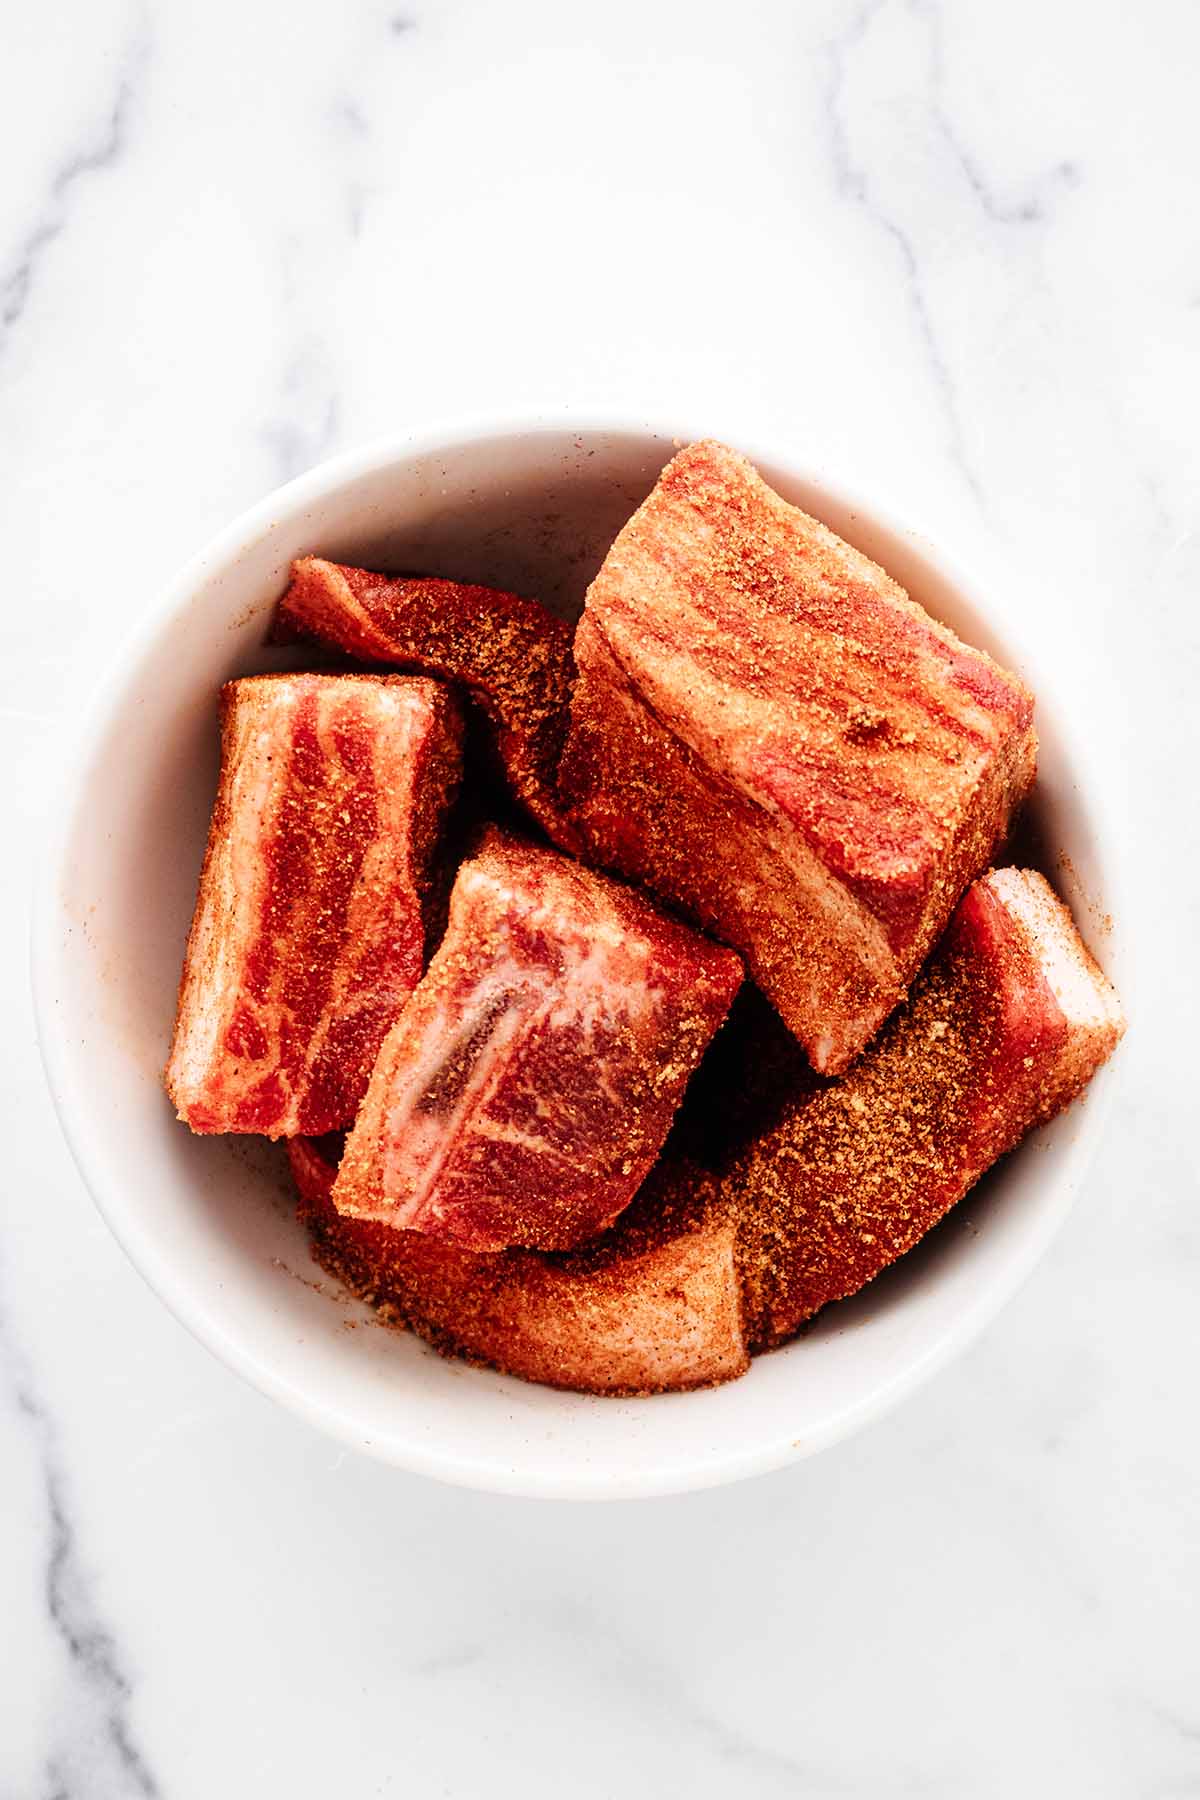 Beef short ribs rubbed with spice rub in a white bowl